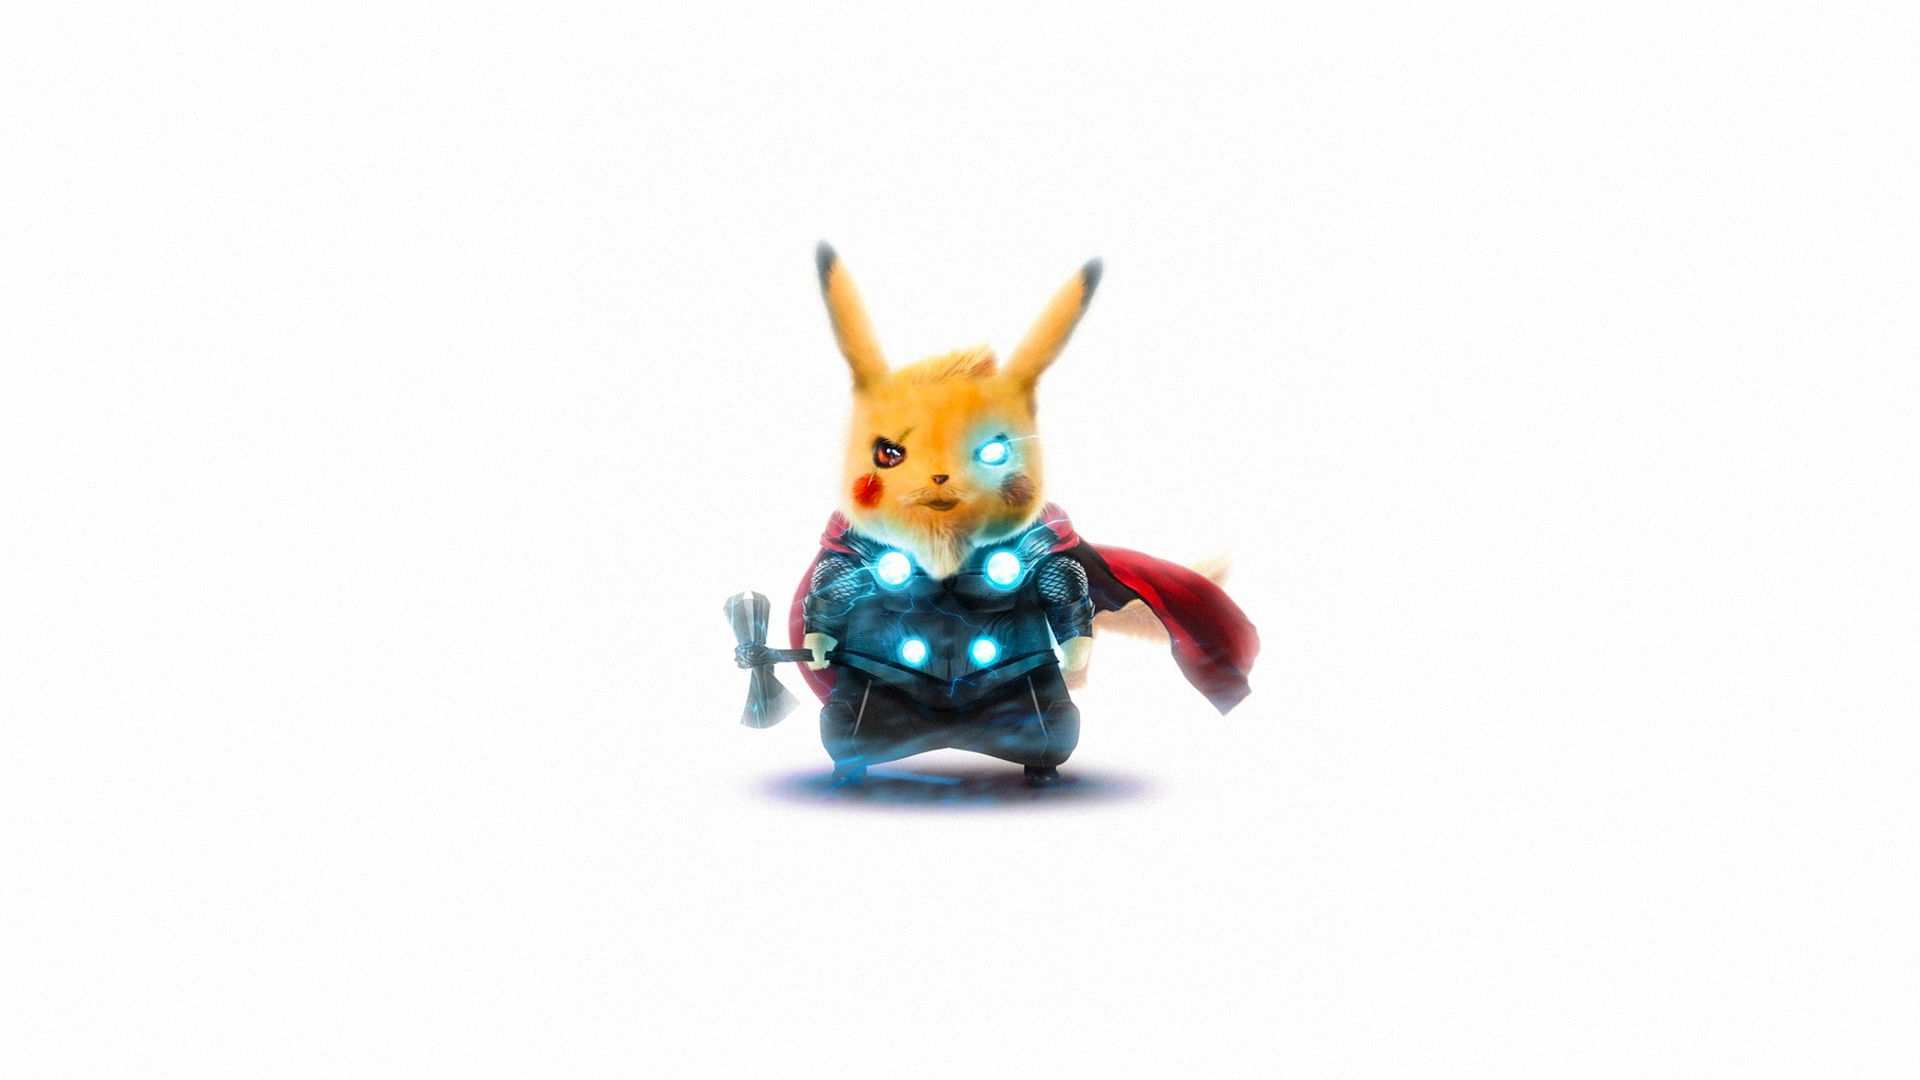 General 1920x1080 Thor Pikachu Marvel Cinematic Universe comics Marvel Comics cyan white background crossover